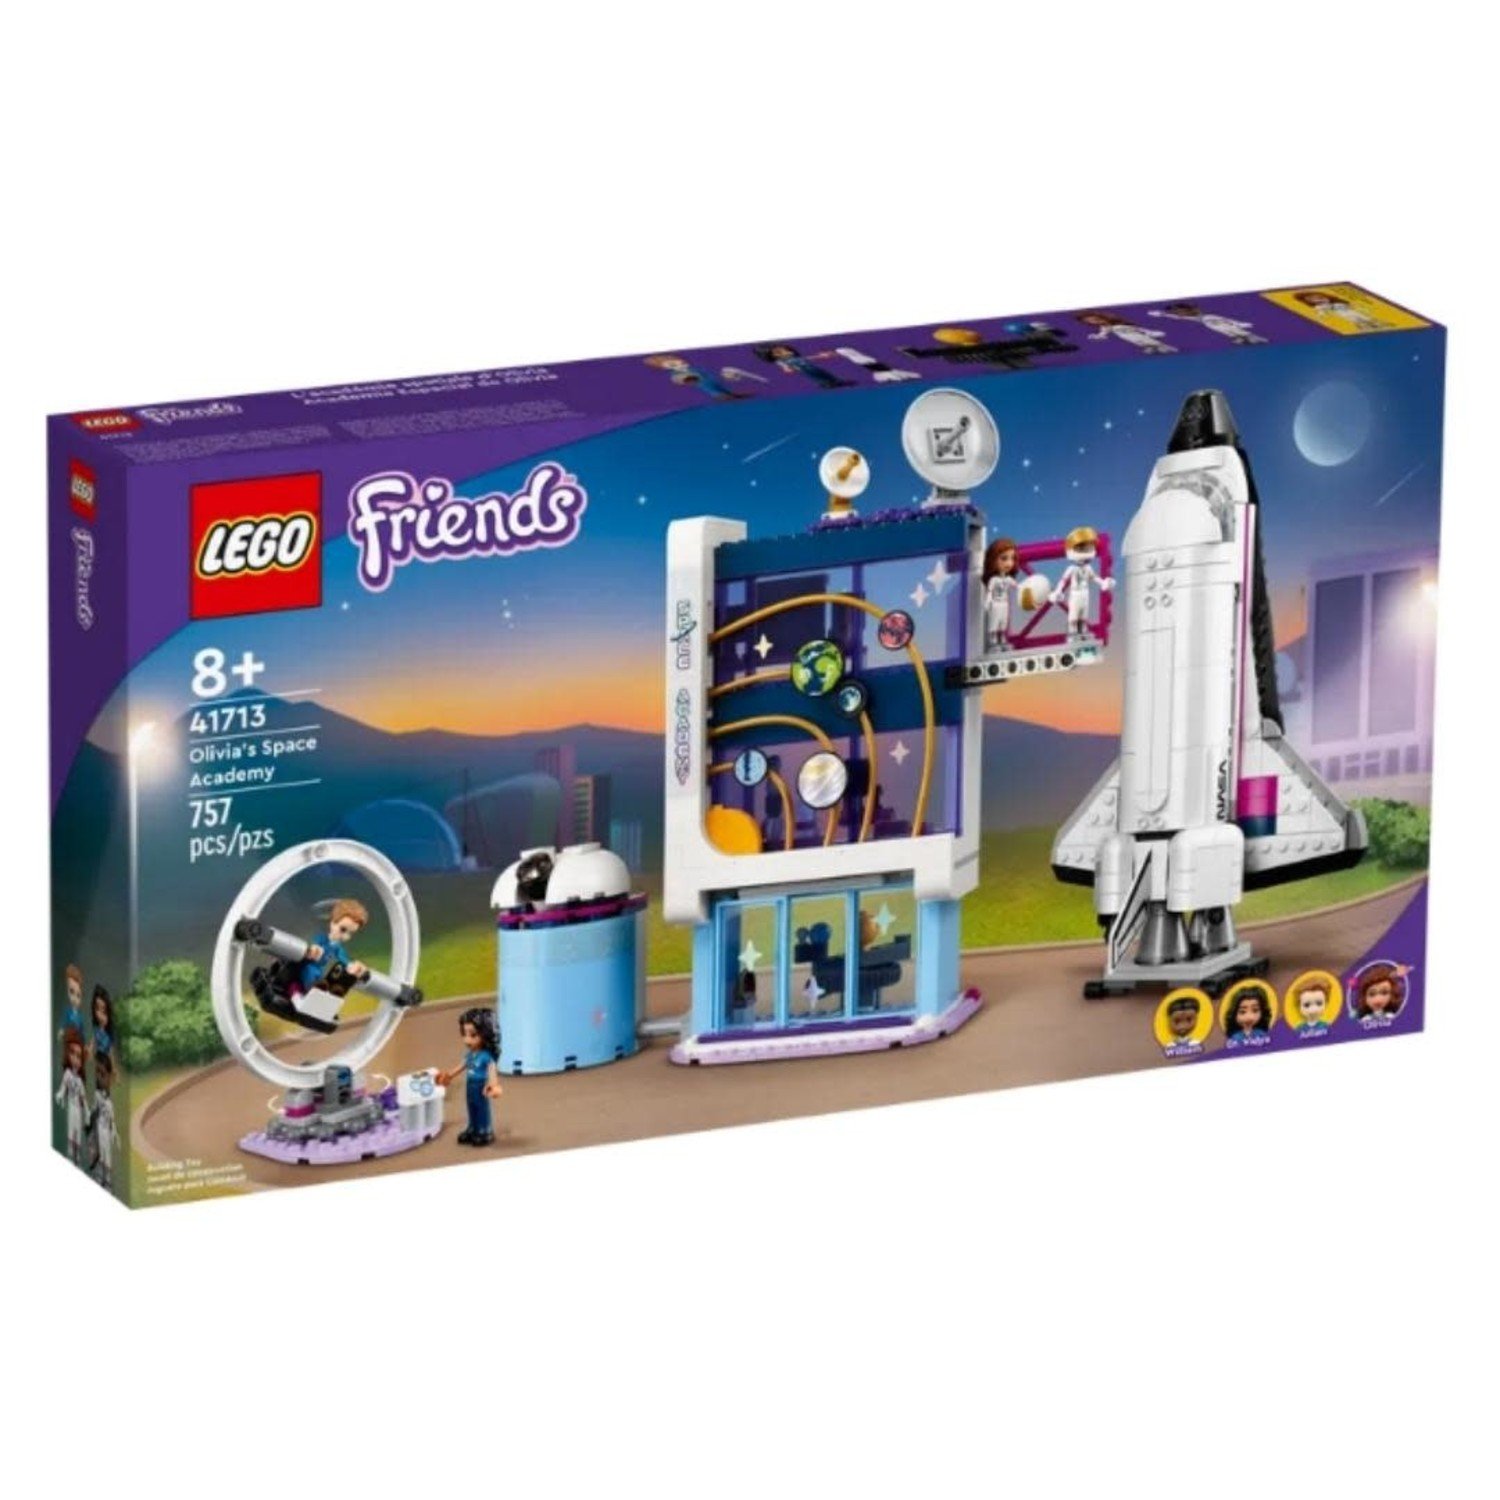 Academy LEGO Friends Toys and Books